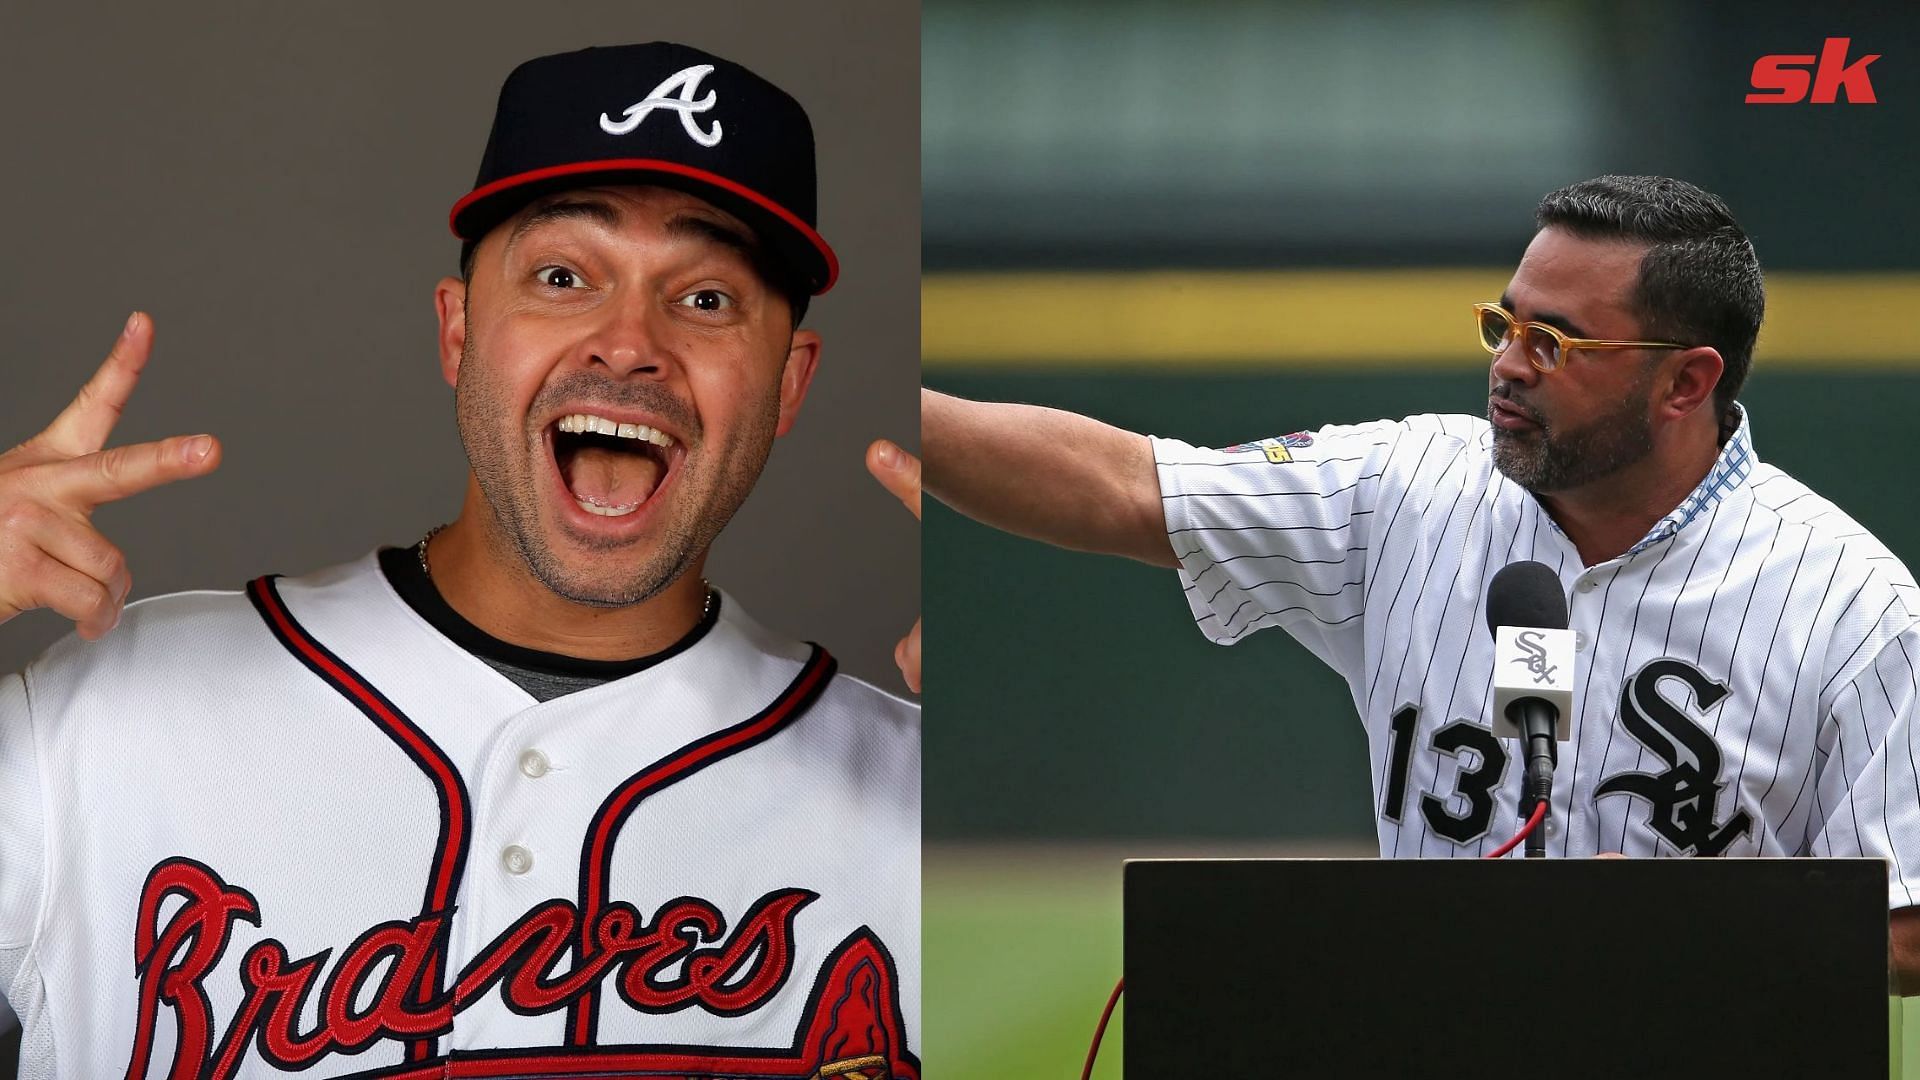 When Ozzie Guillen expressed his 'hate' for Nick Swisher owing to